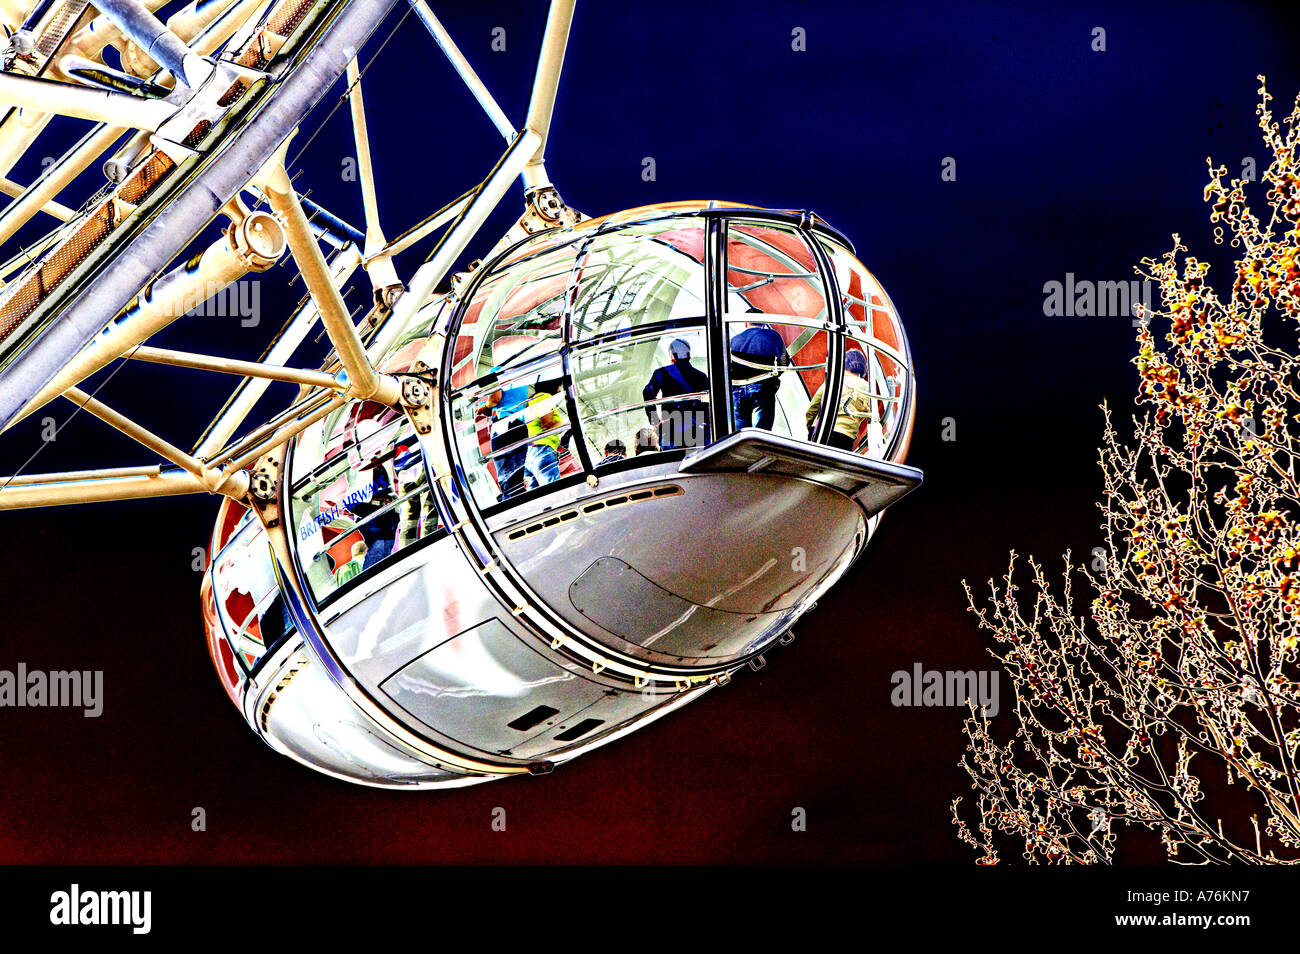 London - Image of British Airways London Eye major tourist attraction - with a difference! Stock Photo